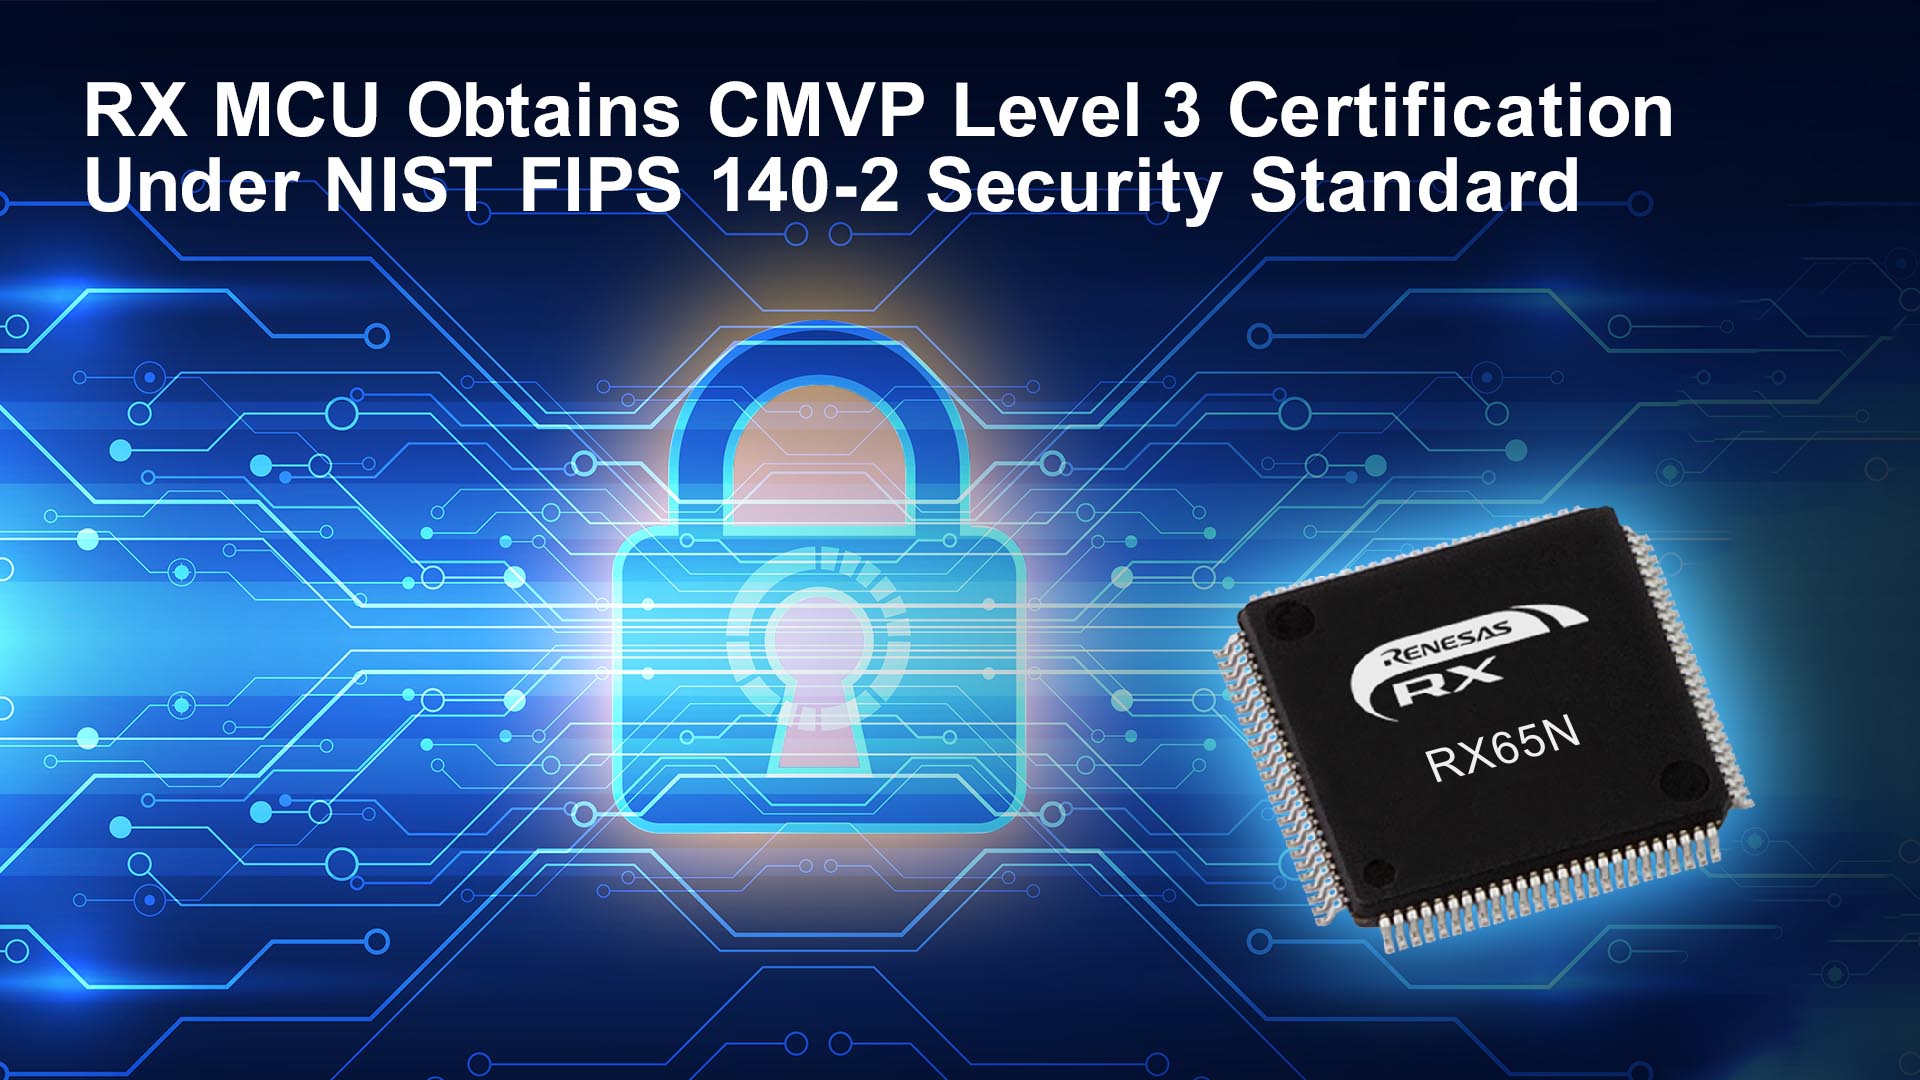 First General-Purpose MCU to get CMVP Level 3 Certification